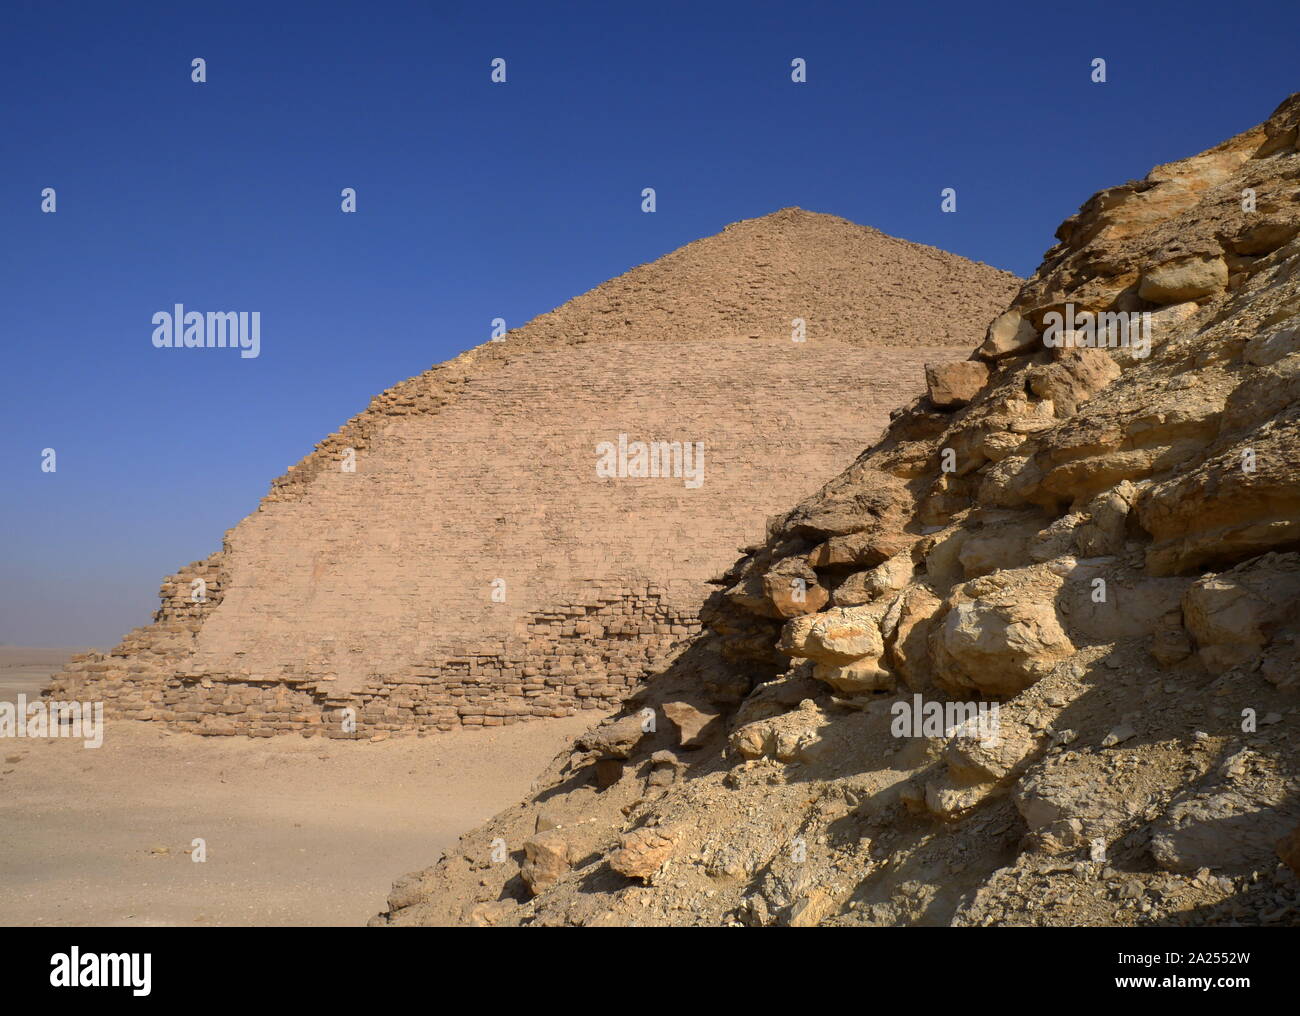 The Bent Pyramid and the Satellite Pyramid are ancient Egyptian pyramids located at the royal necropolis of Dahshur, approximately 40 kilometres south of Cairo, built under the Old Kingdom Pharaoh Sneferu (c. 2600 BC). Stock Photo